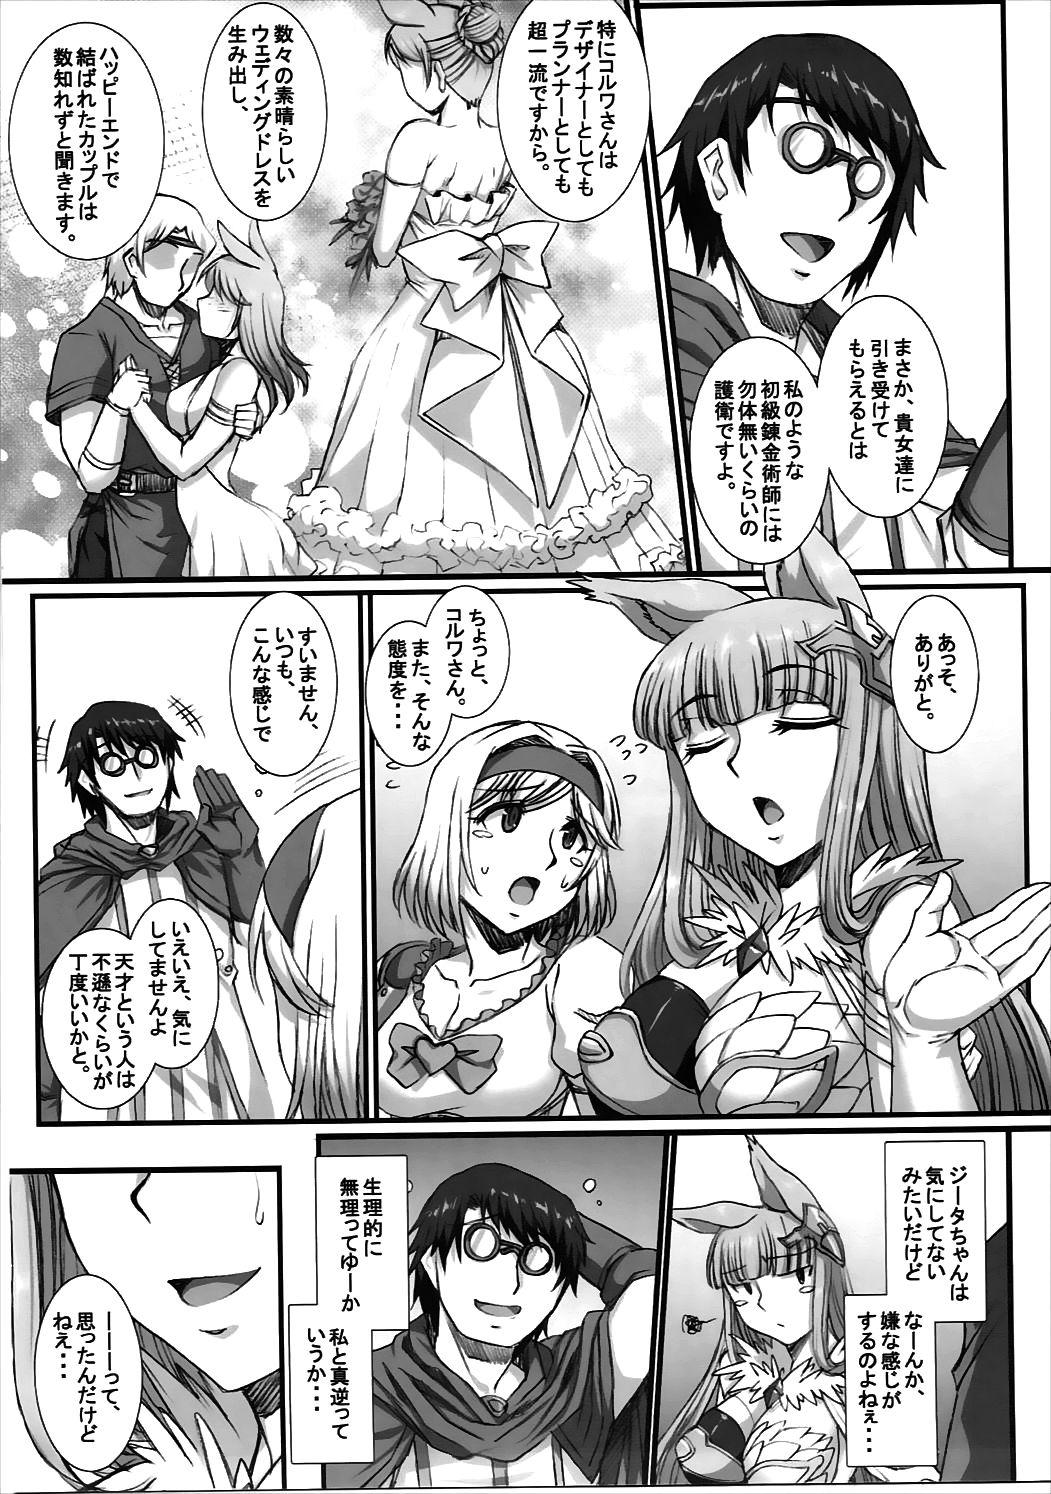 Oiled BAD END to Iu Na no HAPPY END - Granblue fantasy Classy - Page 8